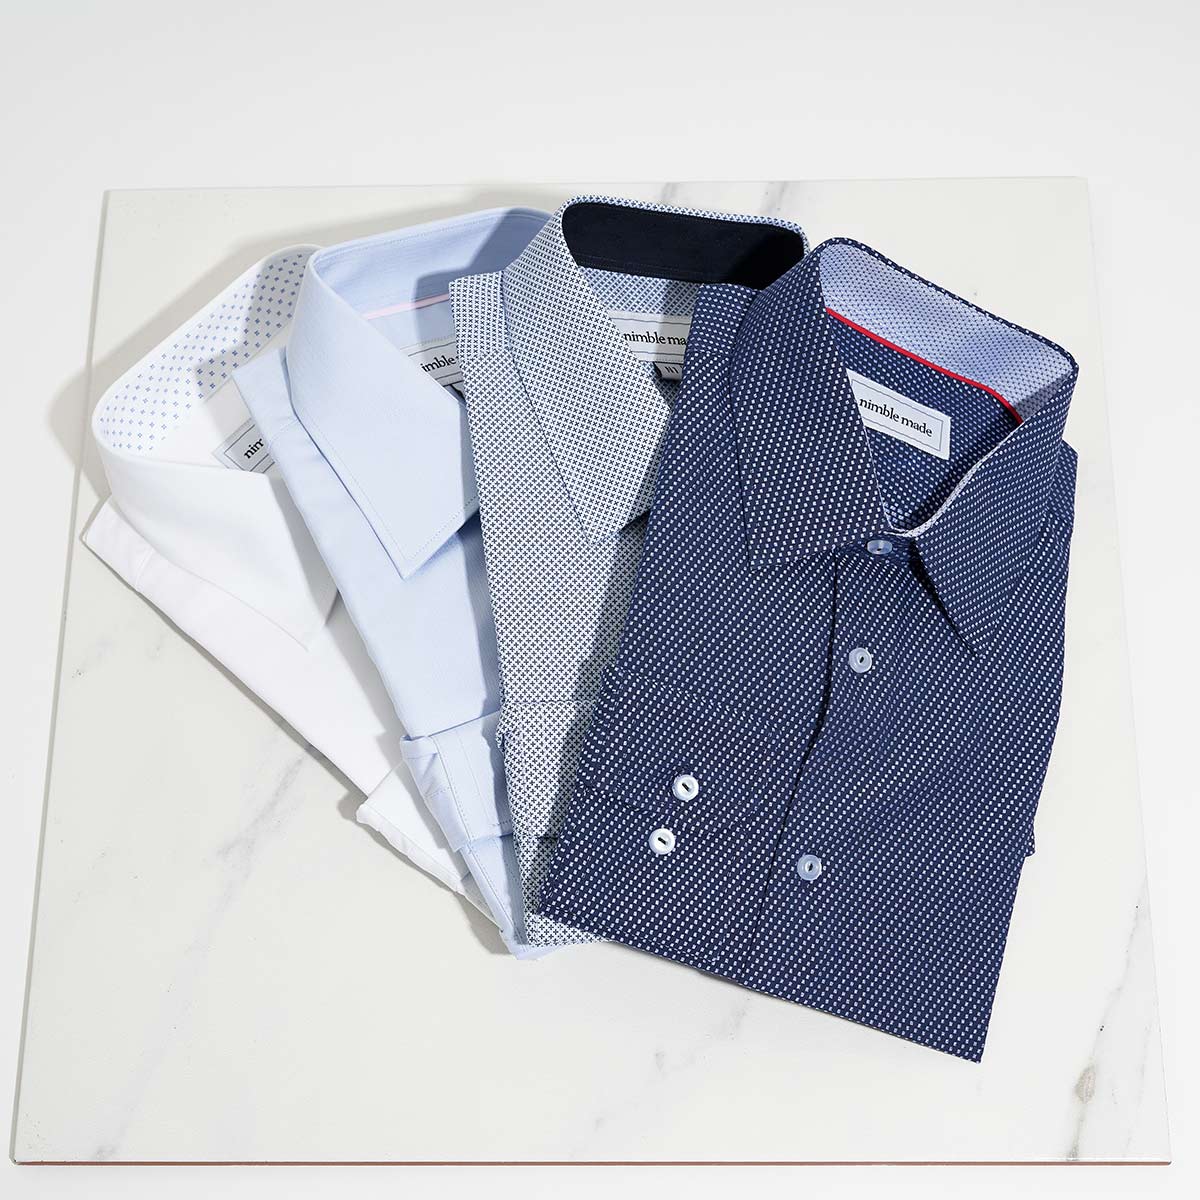 collection of men's collared shirts for professional and casual outfits